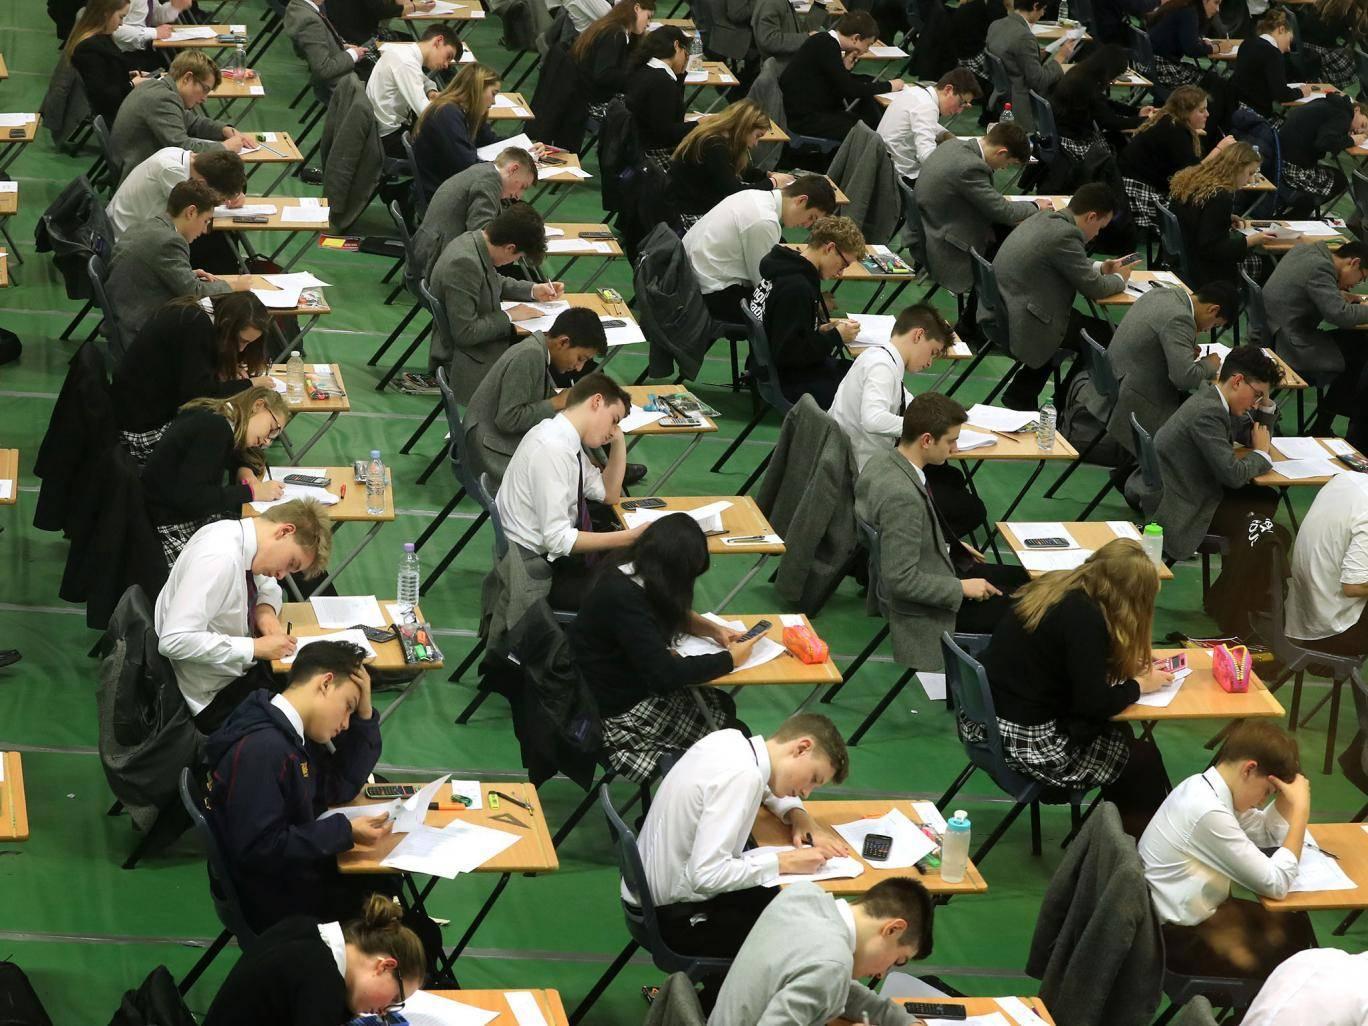 Schools need to focus on teachers' wellbeing as much as they do on exam results